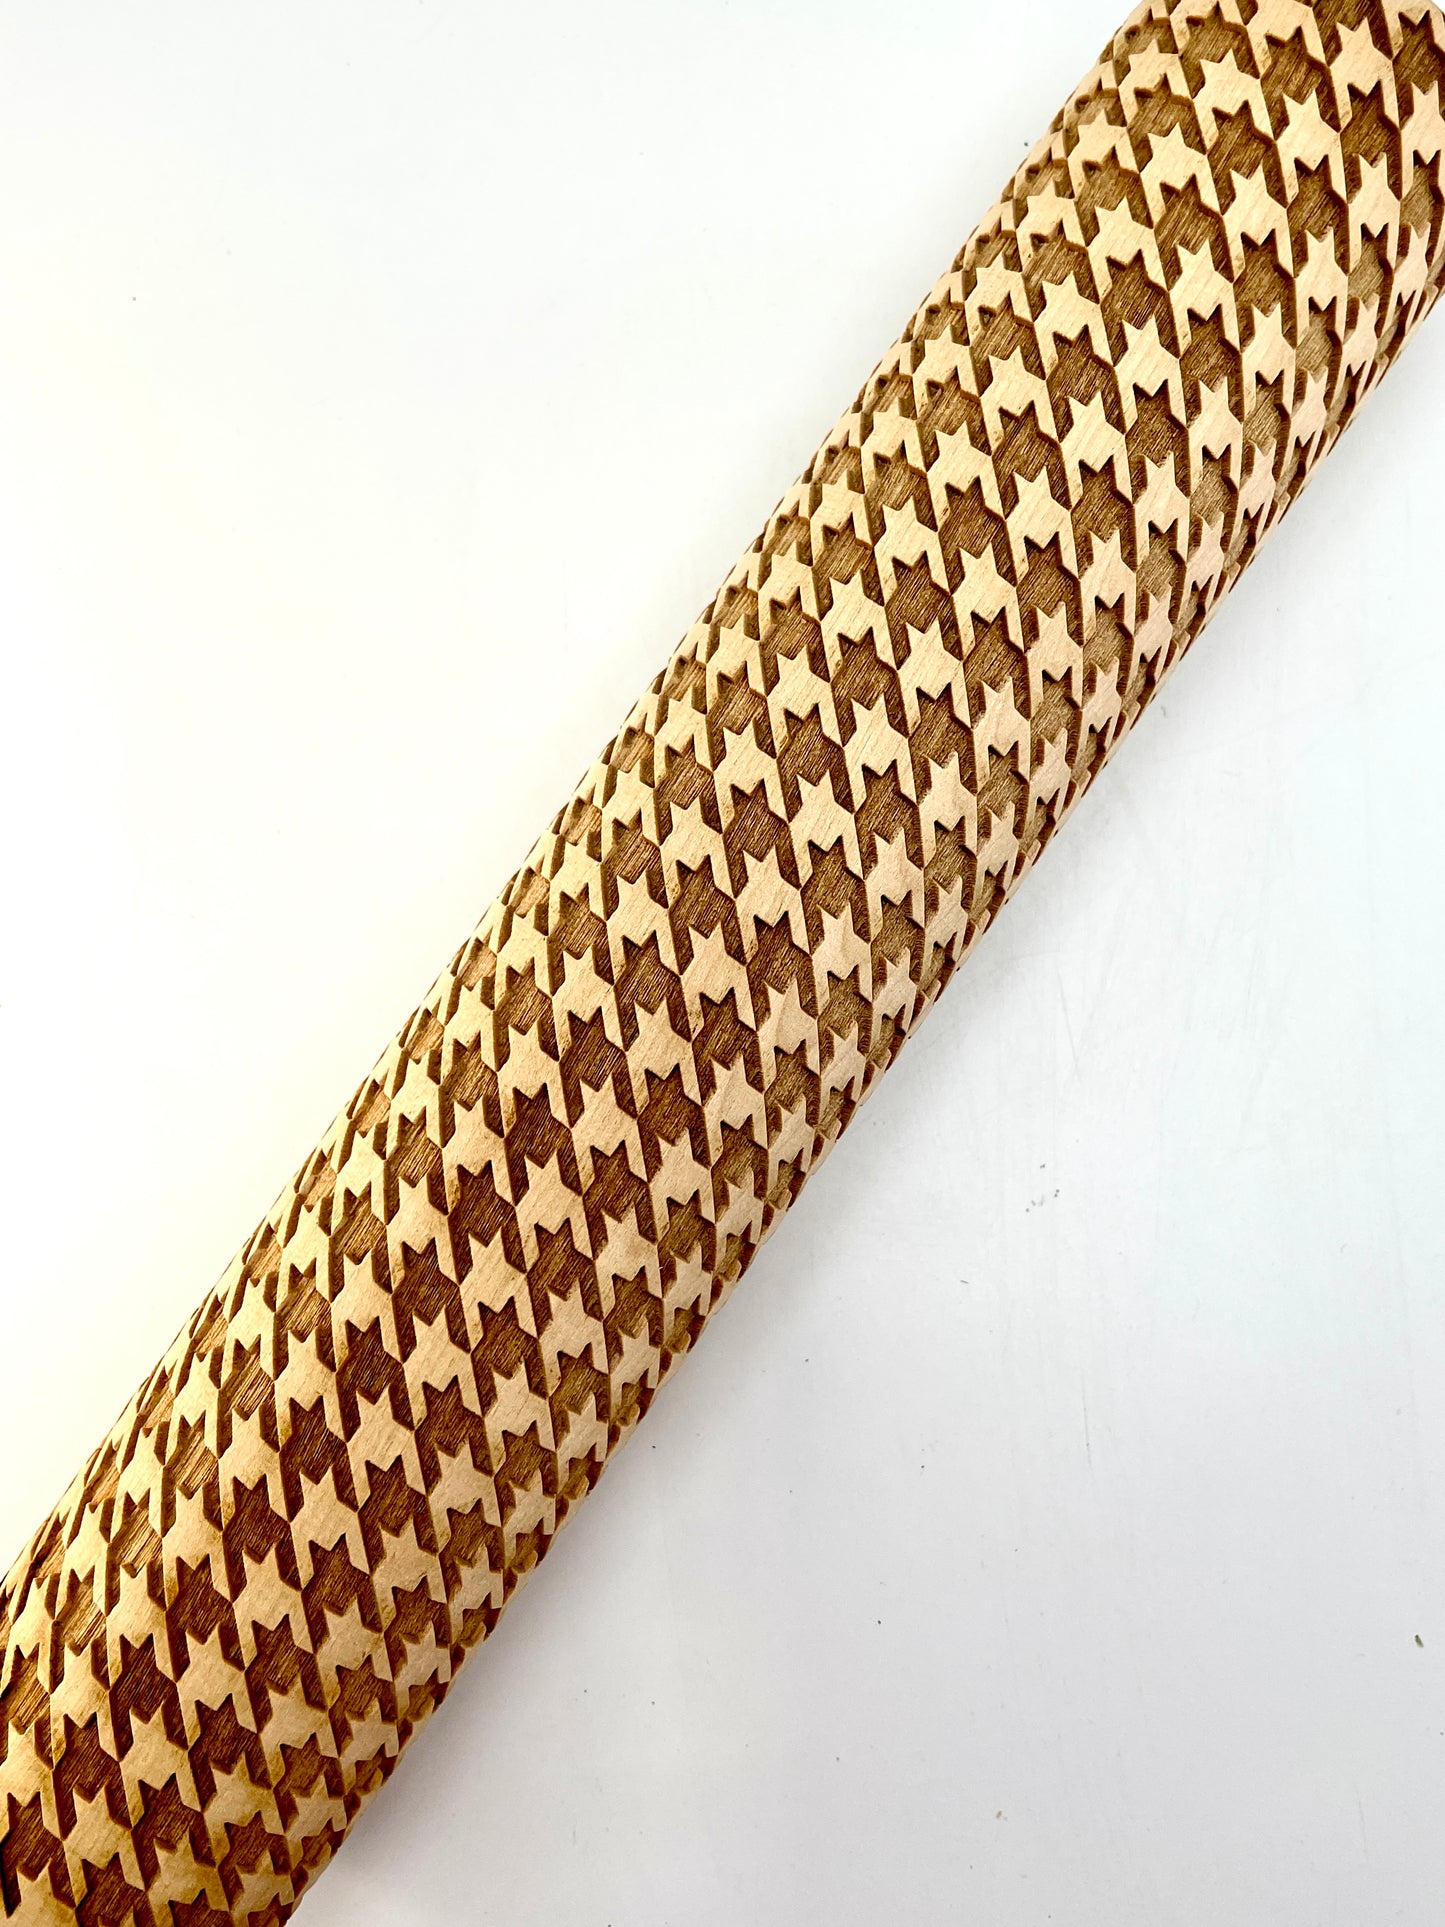 7" Houndstooth Textured Rolling Pin